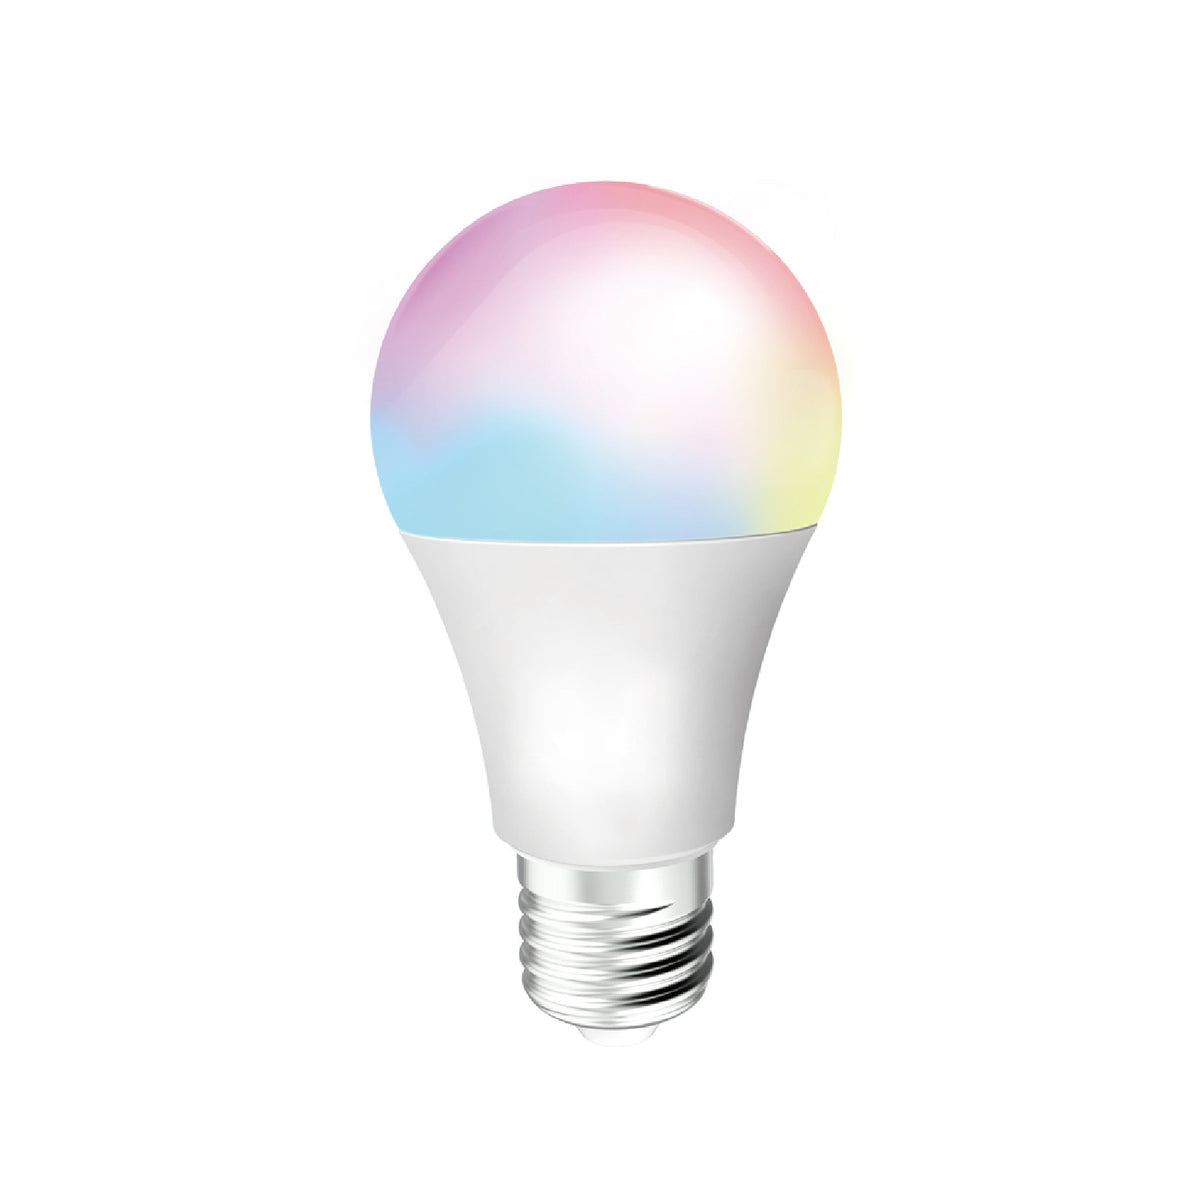 Intelligent 10W light bulb from 806 dimmable Lumen with application compatible with Google and Alexa